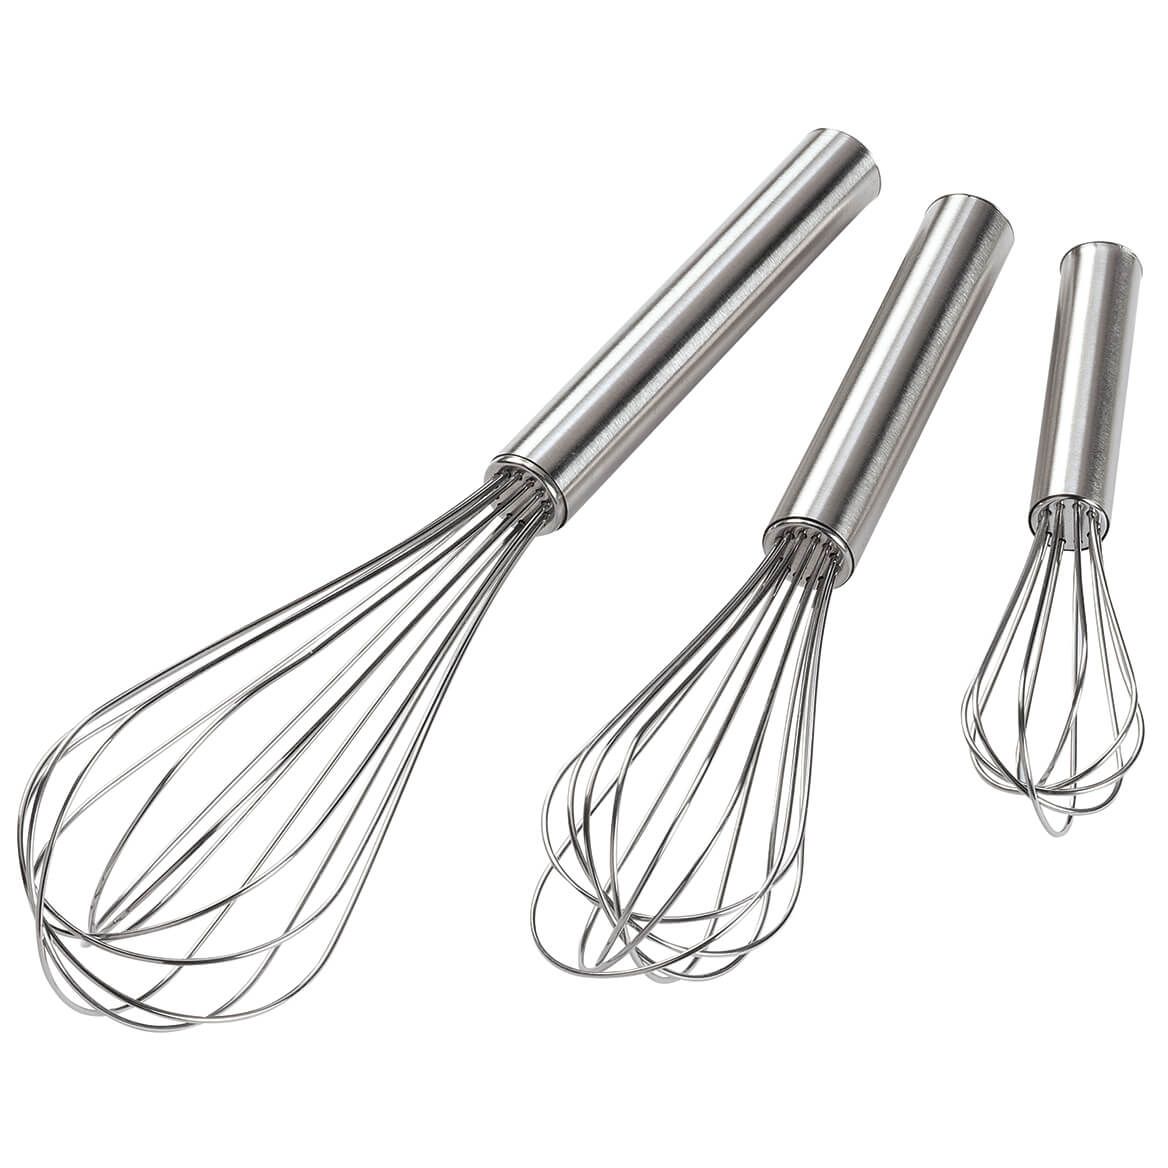 Set of 3  Stainless Steel Whisk Set - Set of 3 by Home Marketplace + '-' + 376870